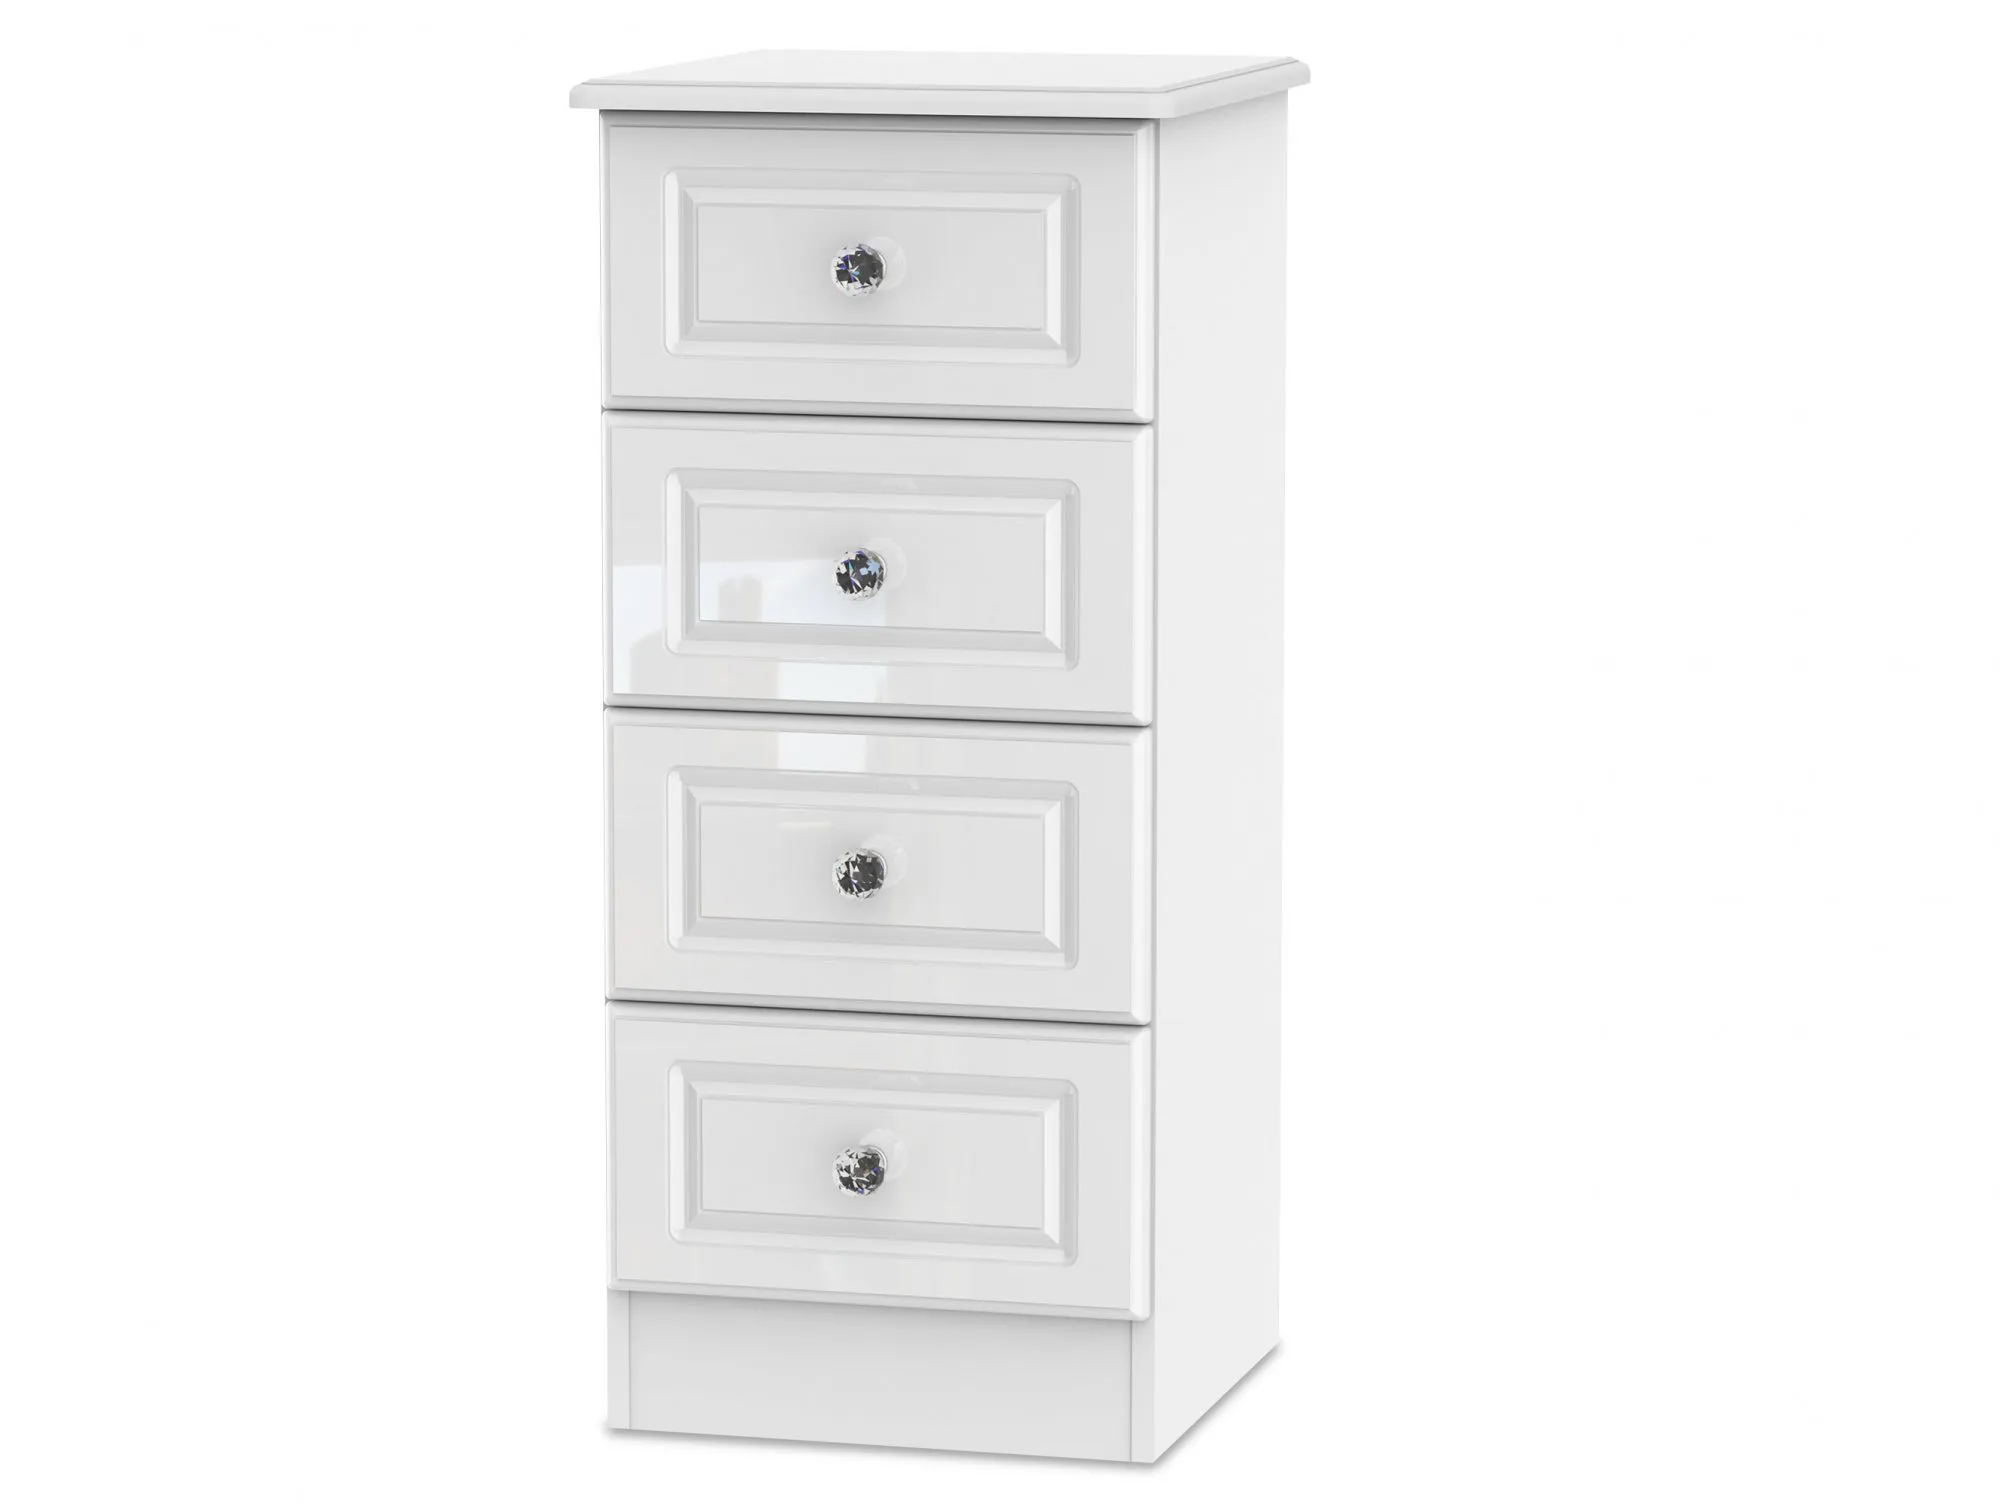 Welcome Welcome Balmoral White High Gloss 4 Drawer Narrow Chest of Drawers (Assembled)